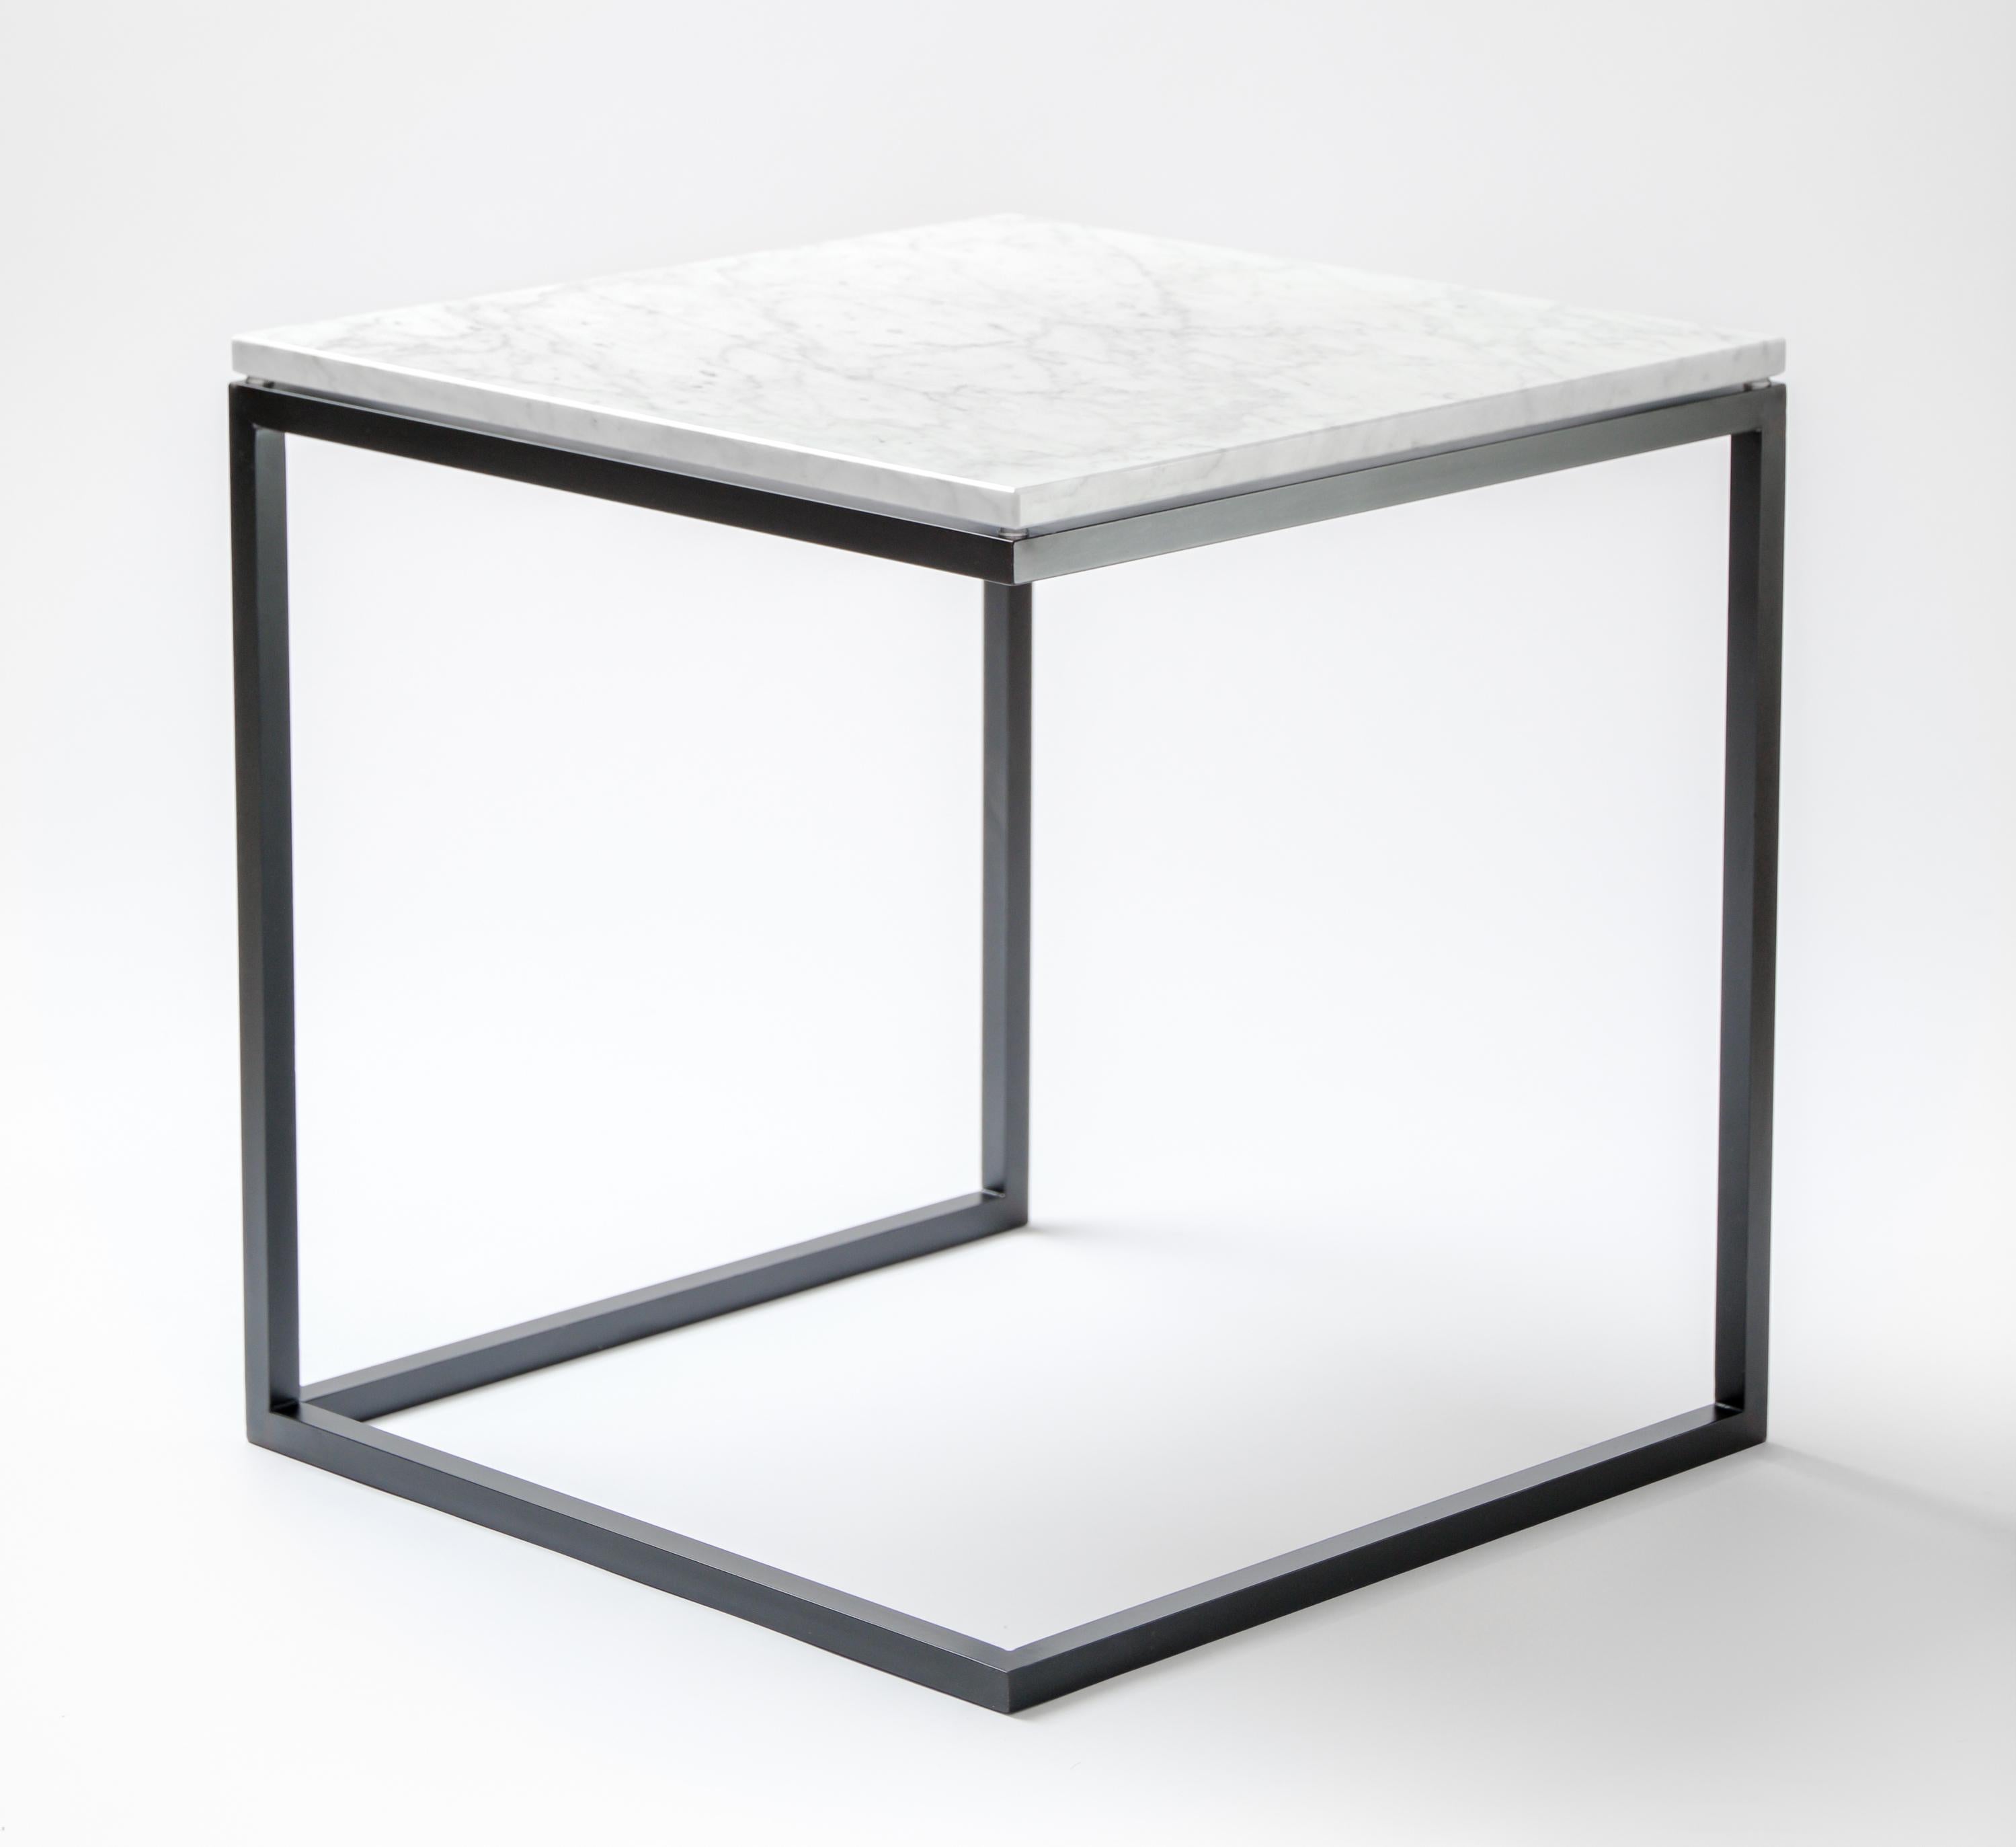 Polished “ESOPO” Modern Handmade Iron Side Table with White Carrara Marble Square Top For Sale